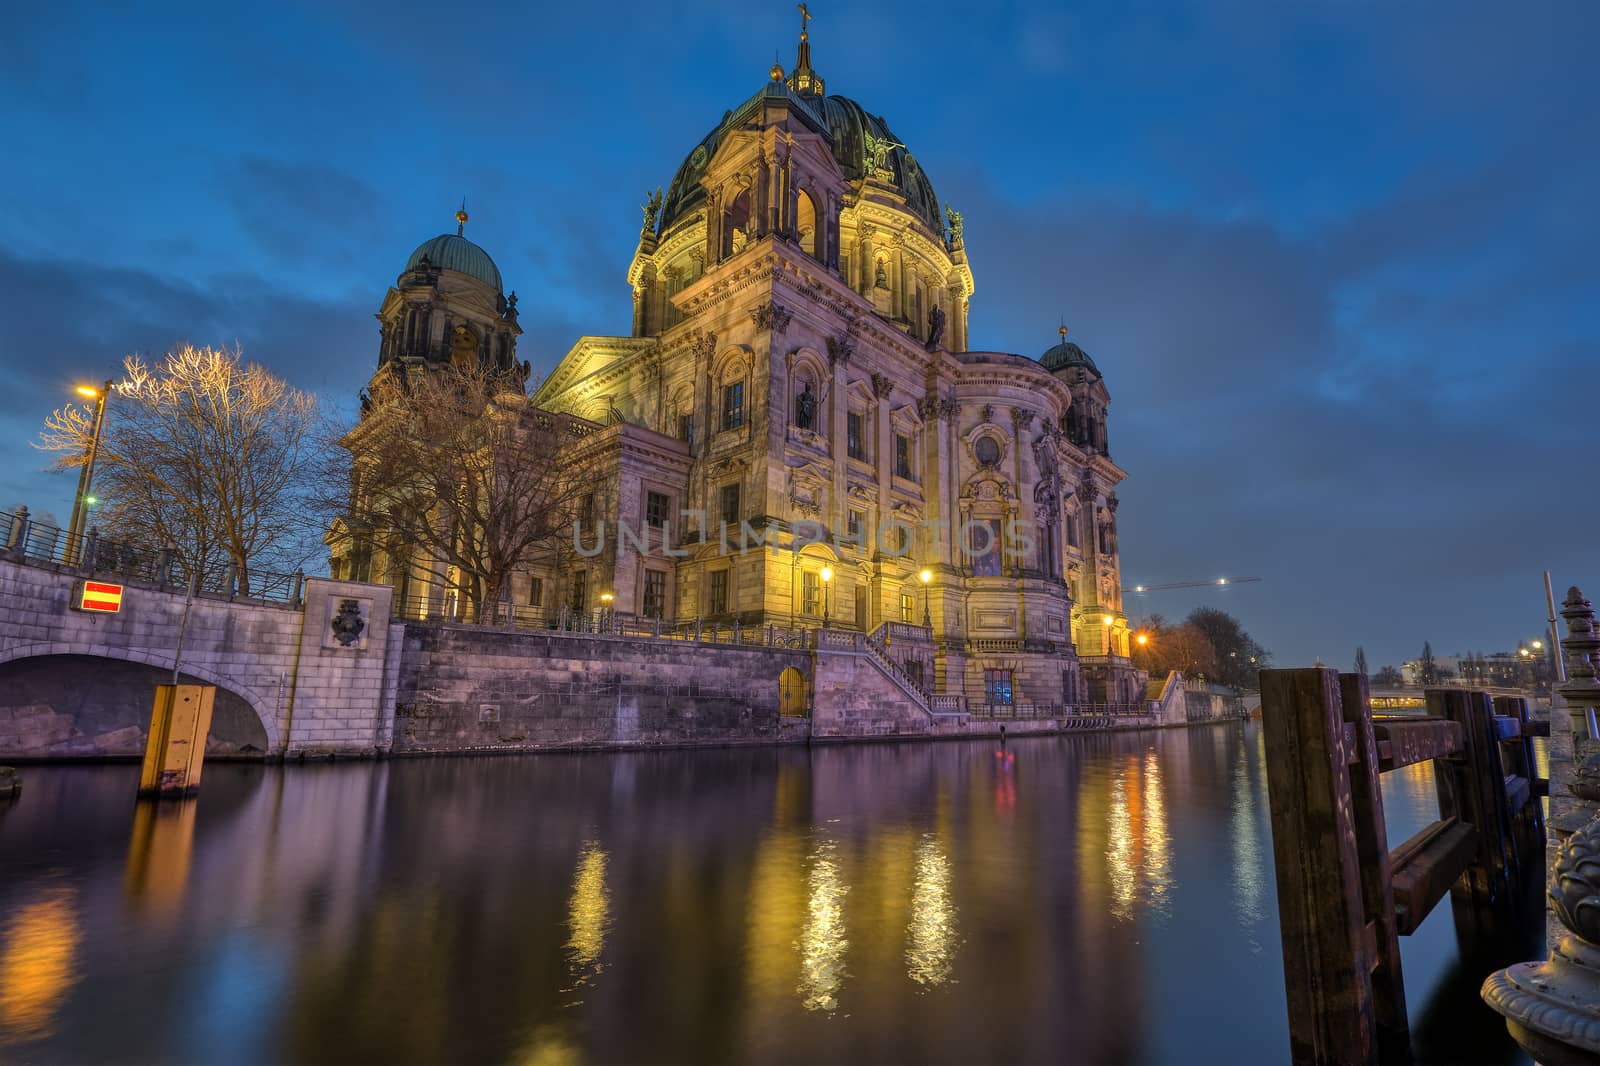 The Berlin Cathedral with the river Spree at dusk